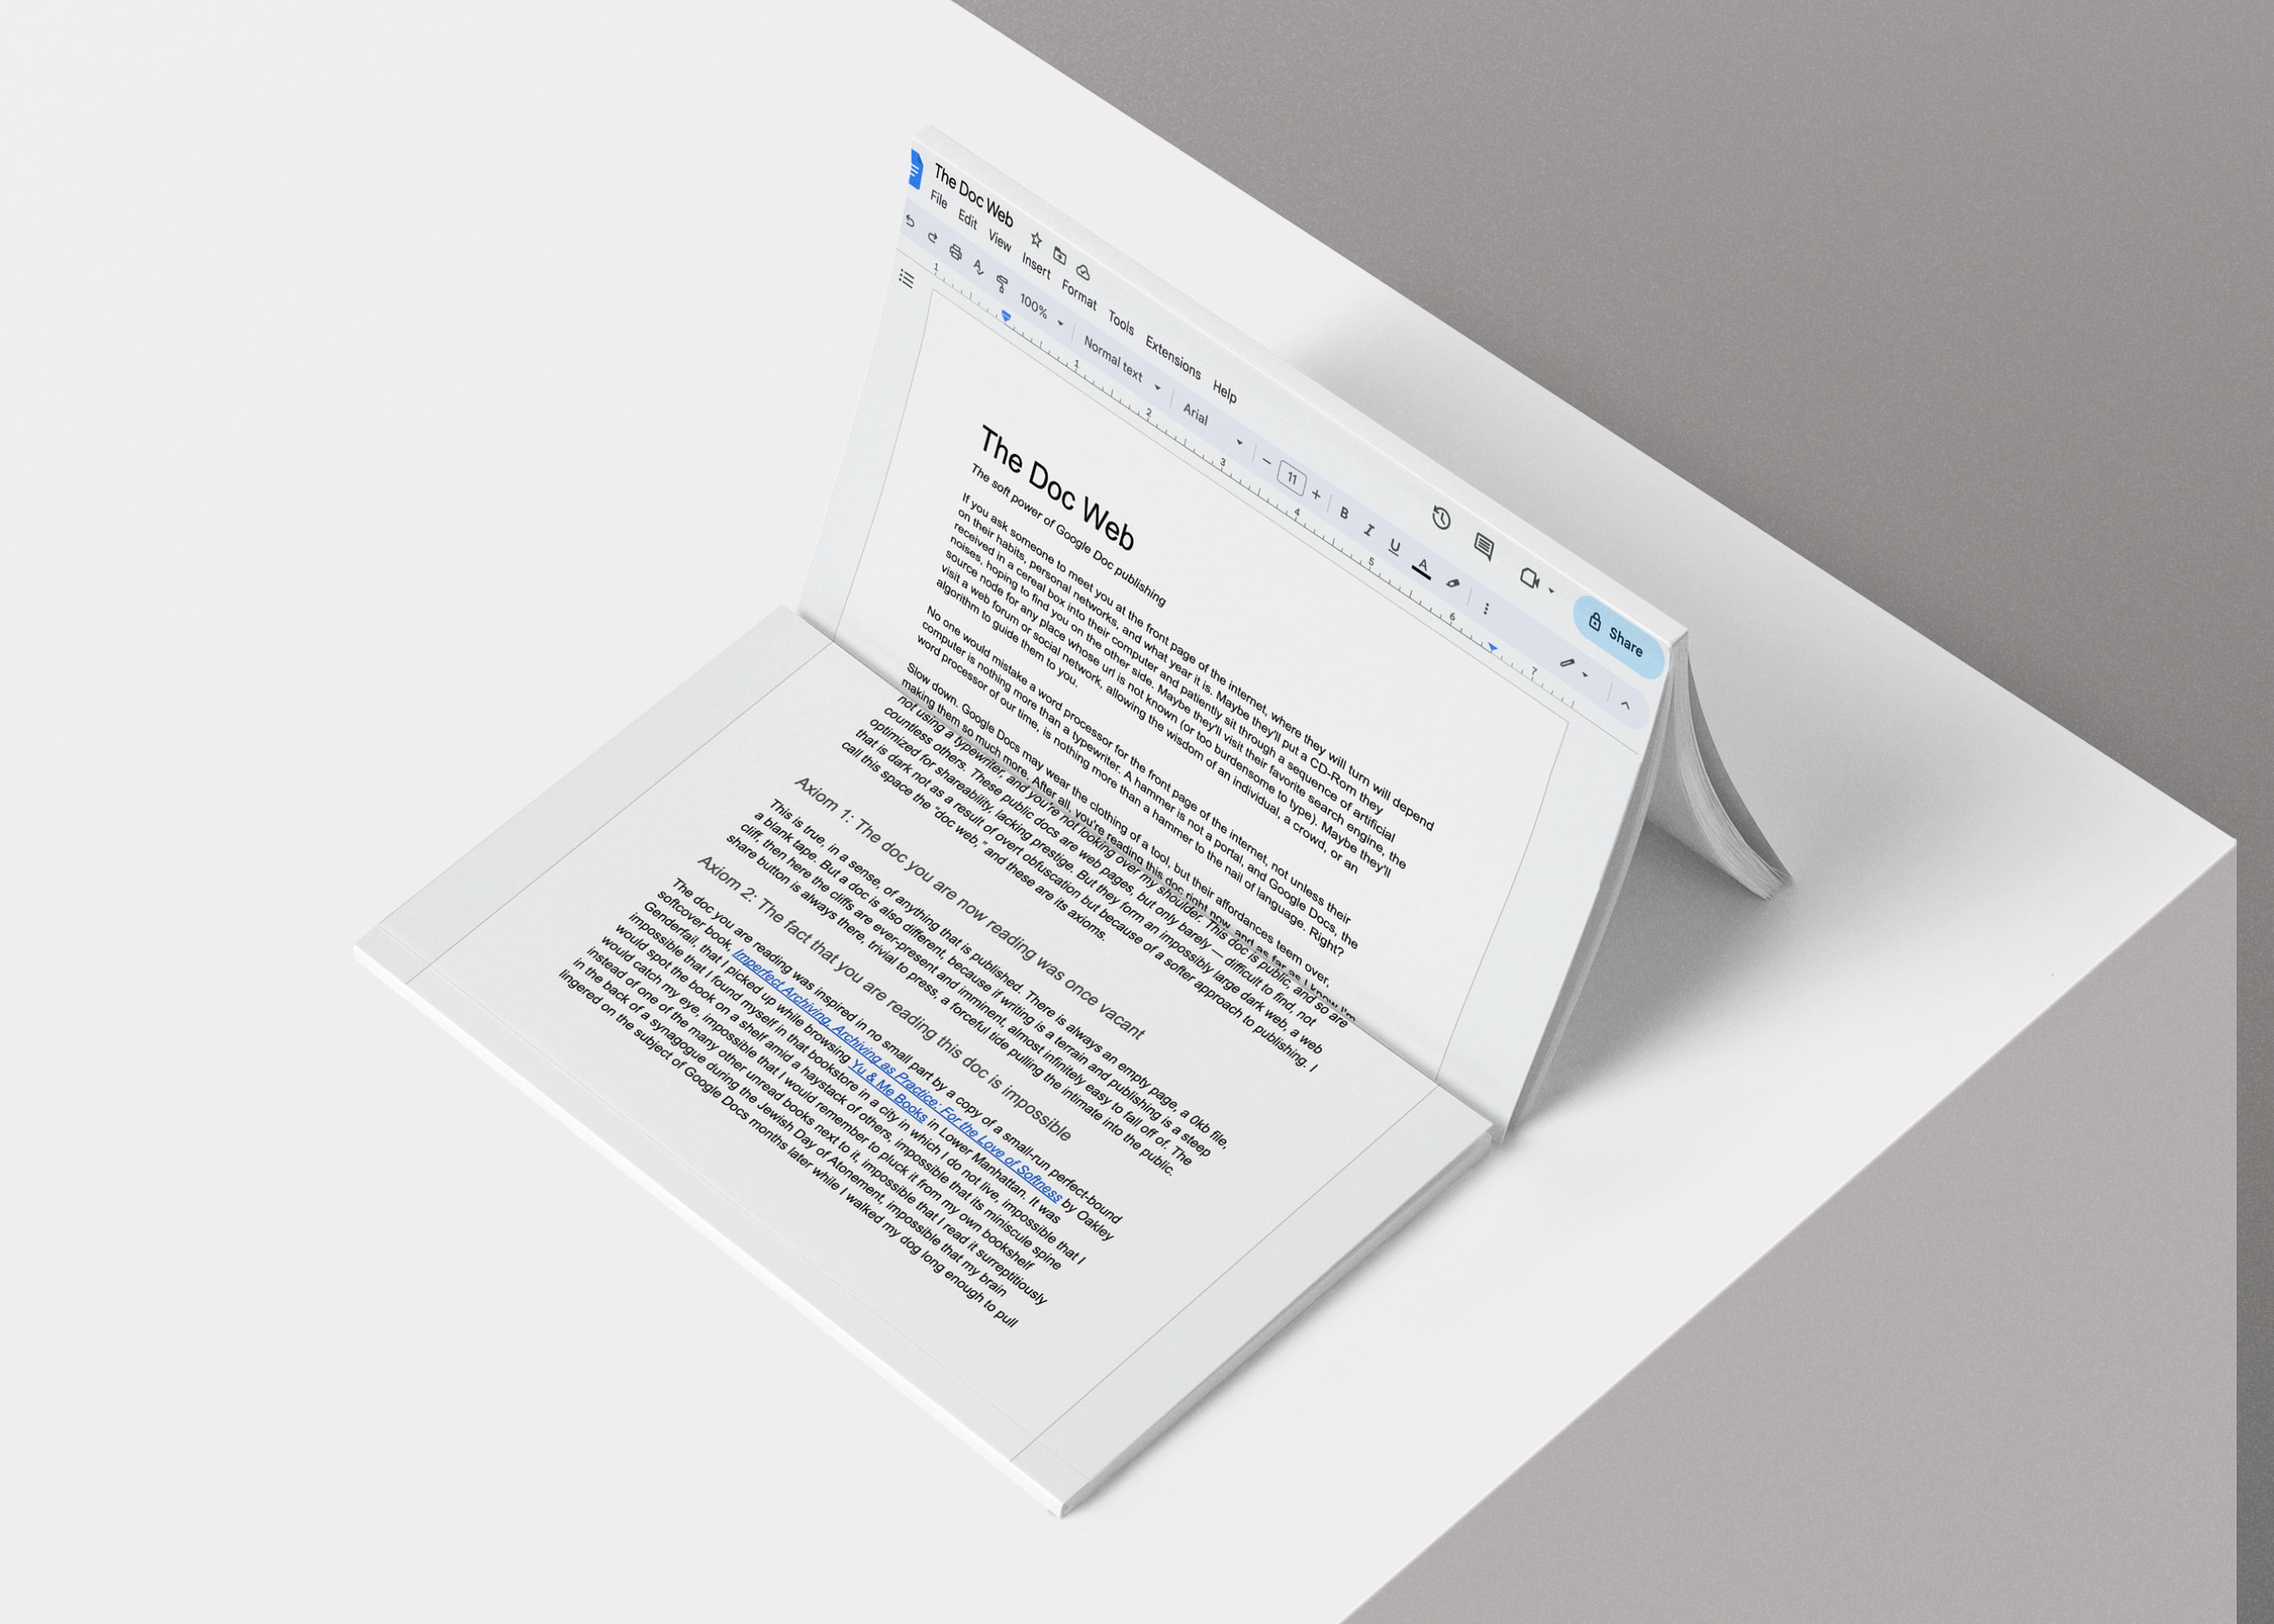 A screenshot of a Google Doc printed onto a softcover book open on a grey background